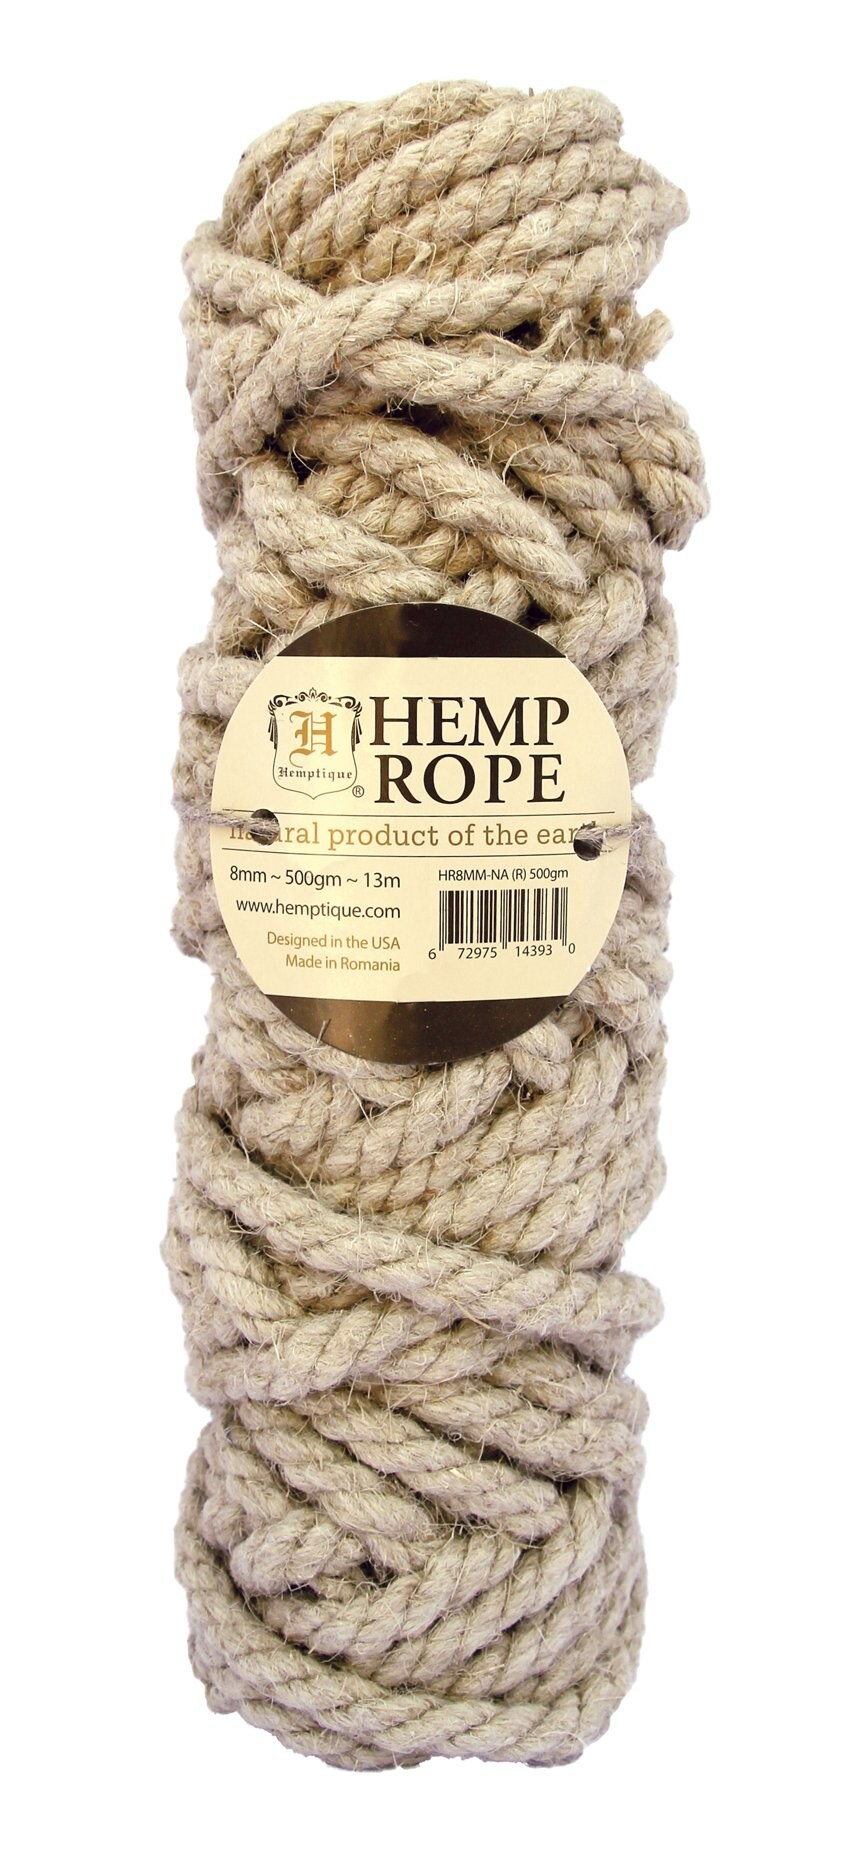 Hemptique Hemp Craft Rope Coils Eco Friendly Sustainable Naturally Grown  Jewelry Bracelet Making Paper Crafting Scrapbooking Bookbinding Mixed Media  Crocheting Macrame Seasonal Holiday Gift Wrapping Outdoor Gardening